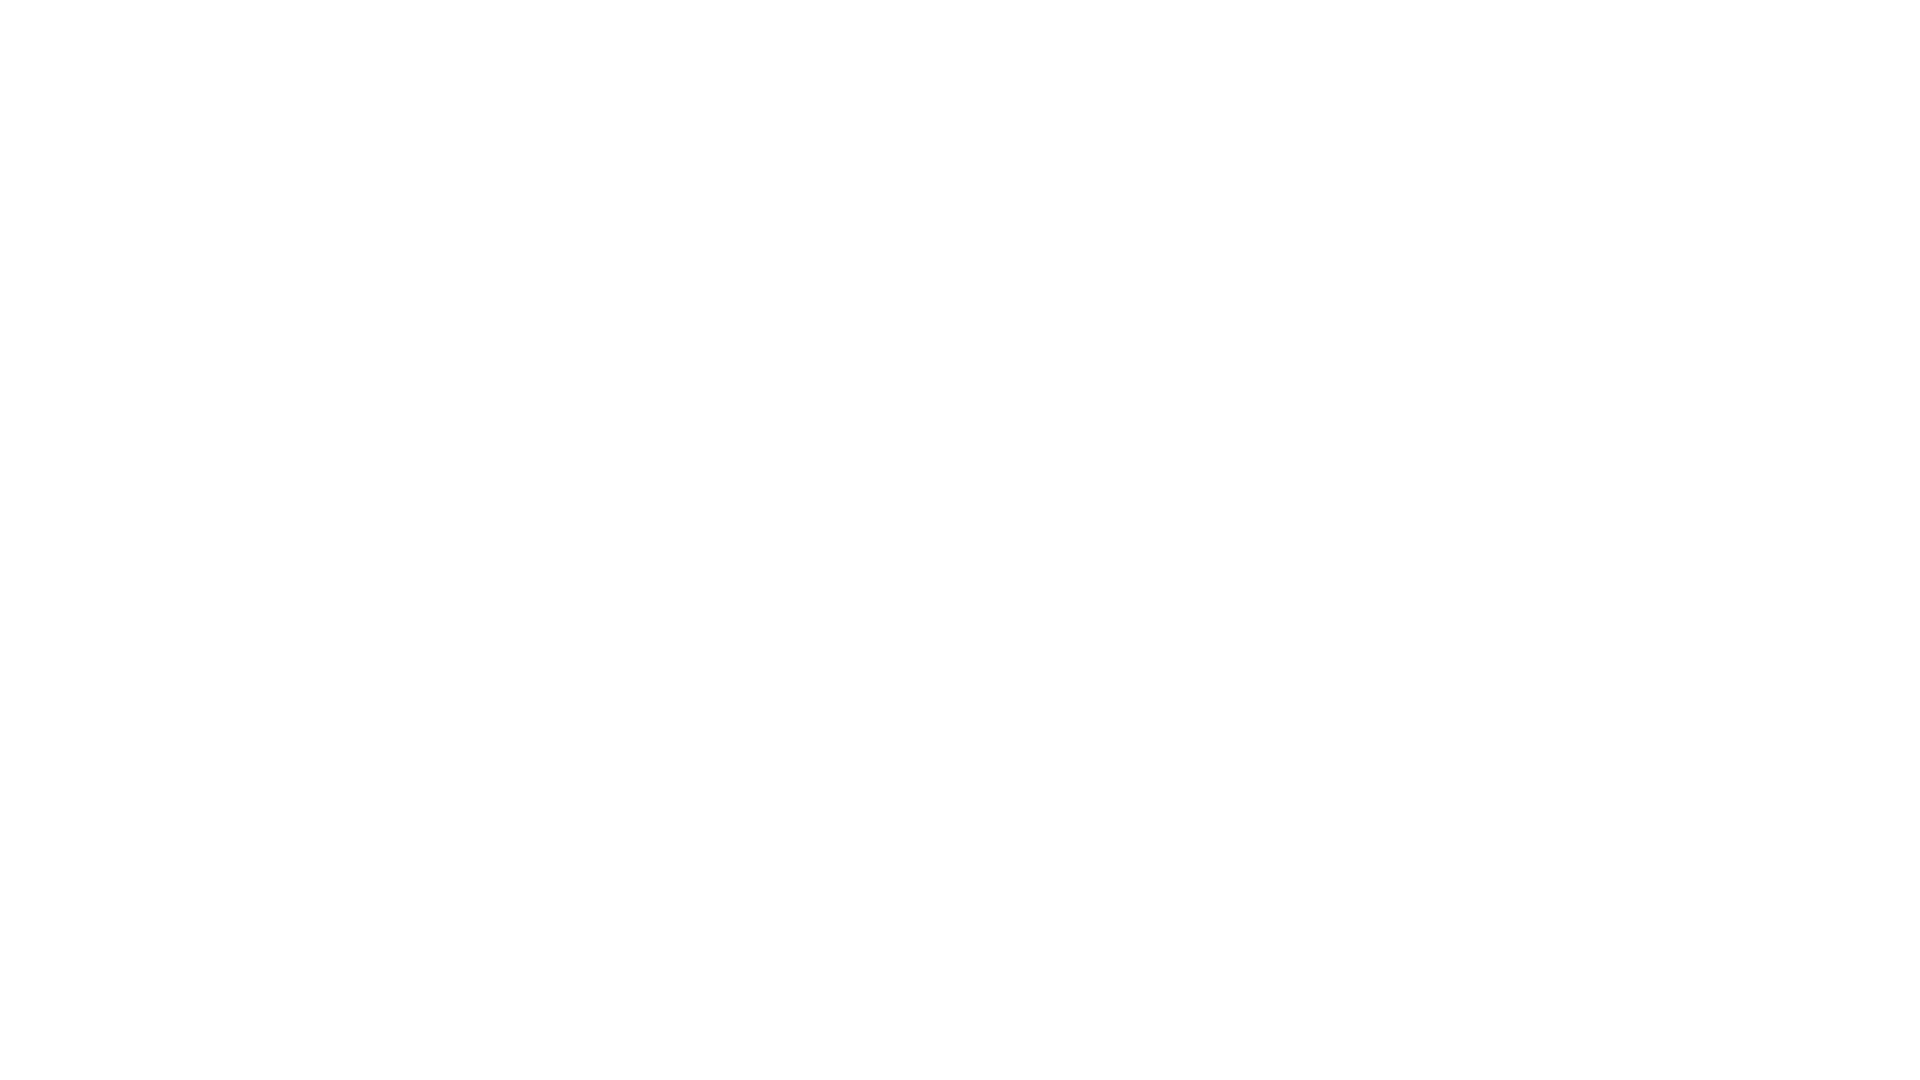 General 1920x1080 controllers Xbox PlayStation minimalism simple background video games